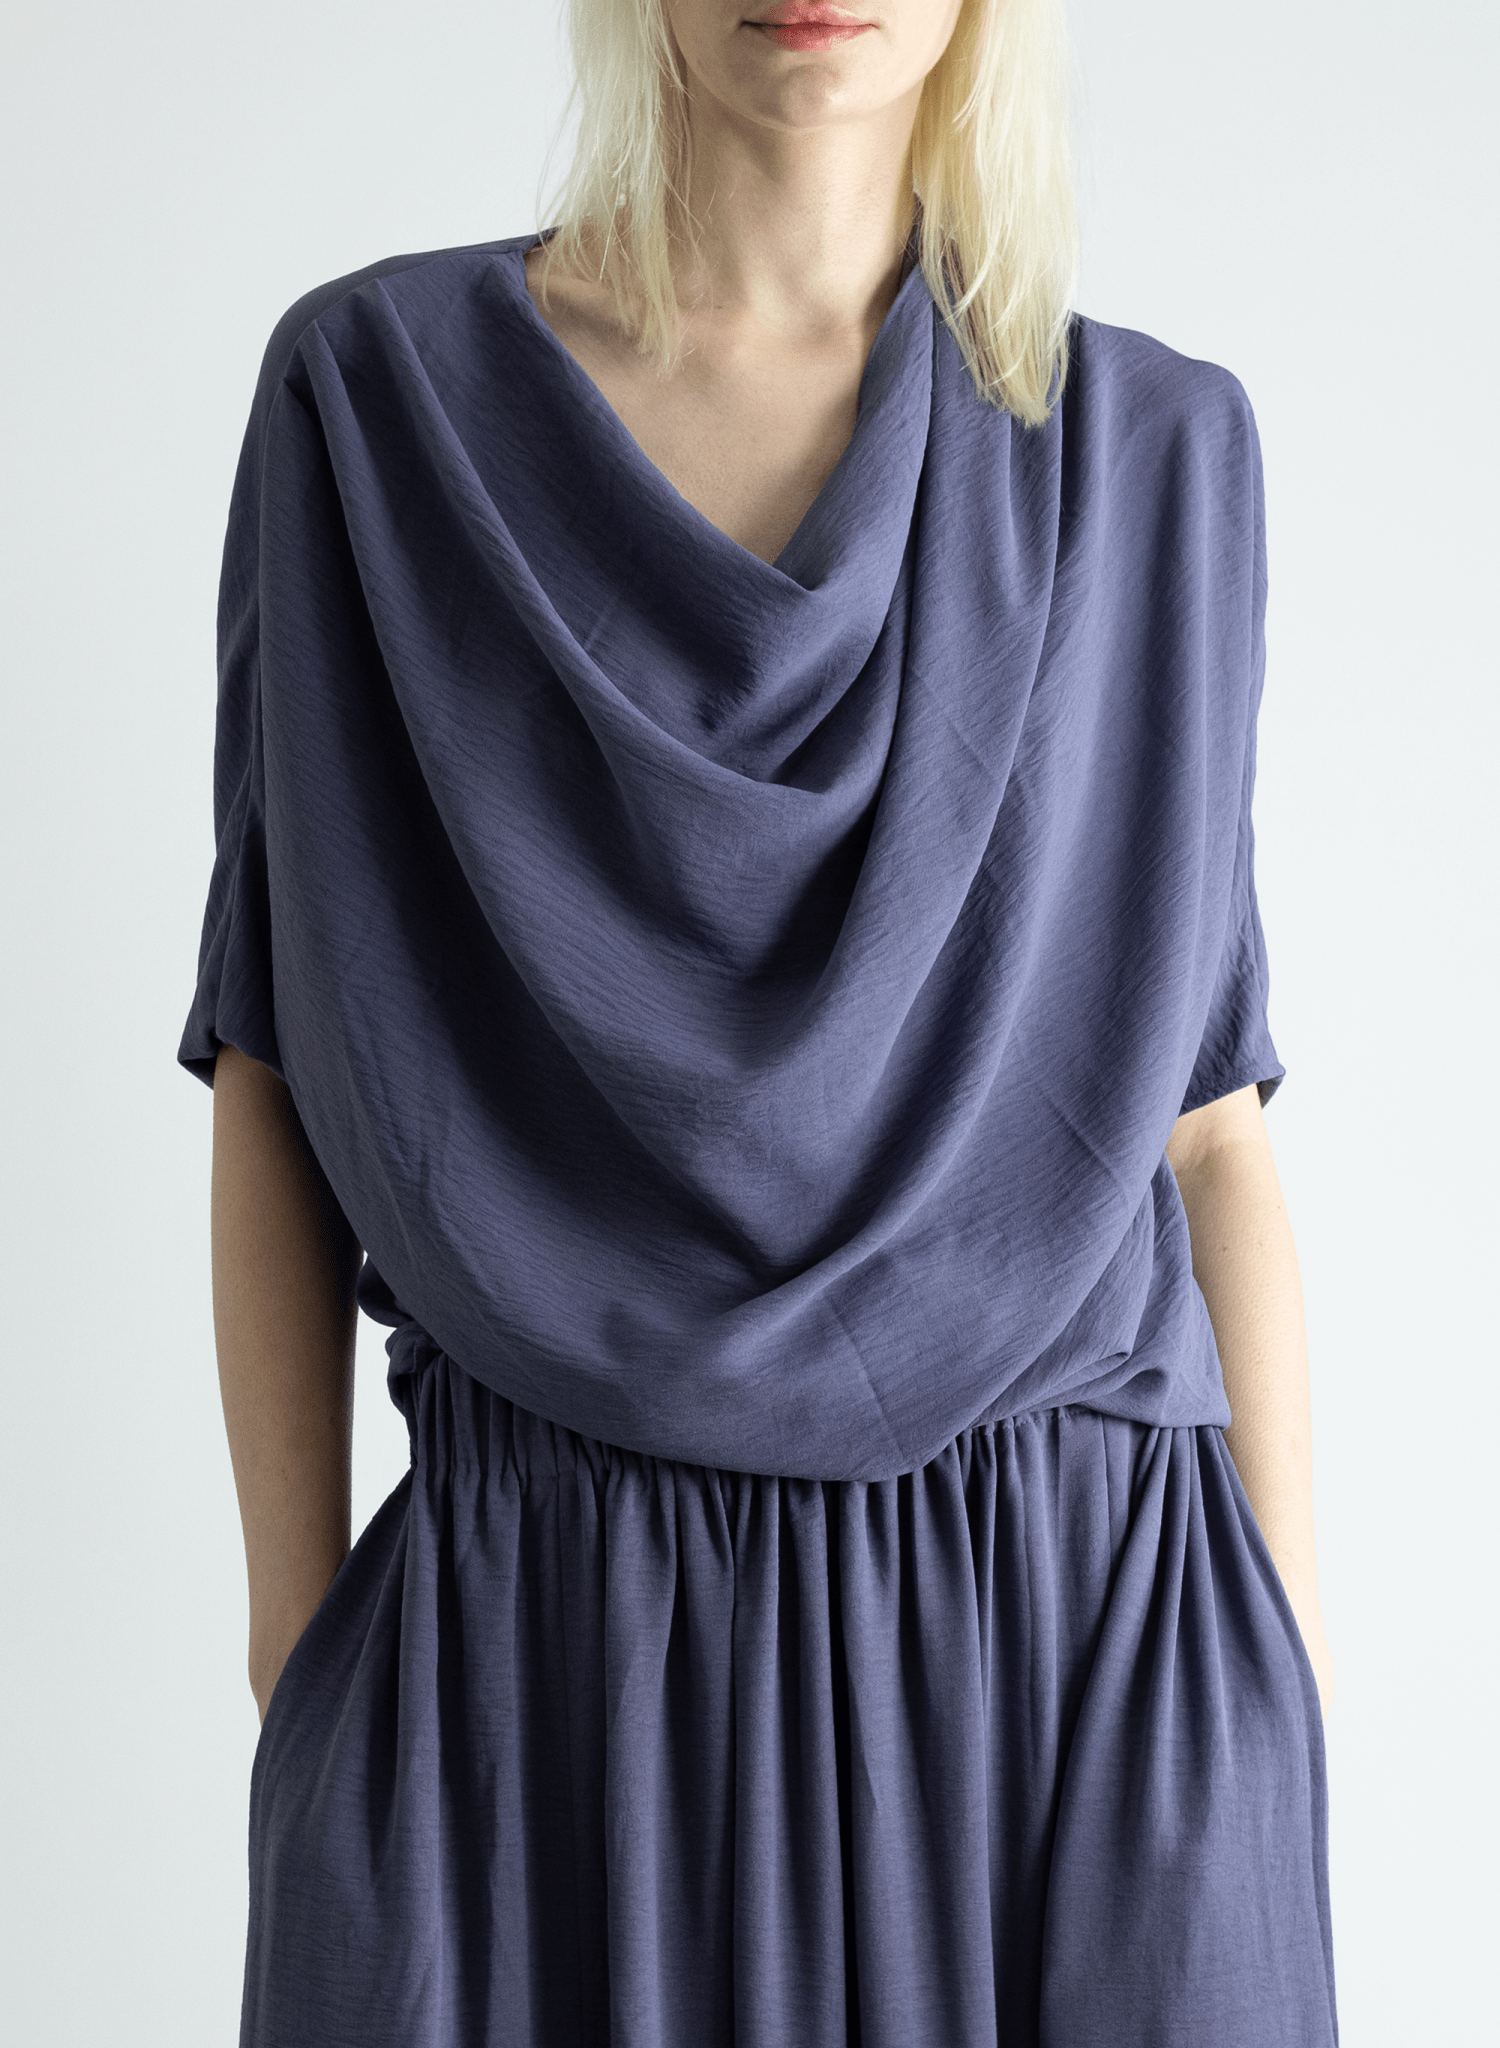 Abstraction Cowl Top - Lilac - Meg